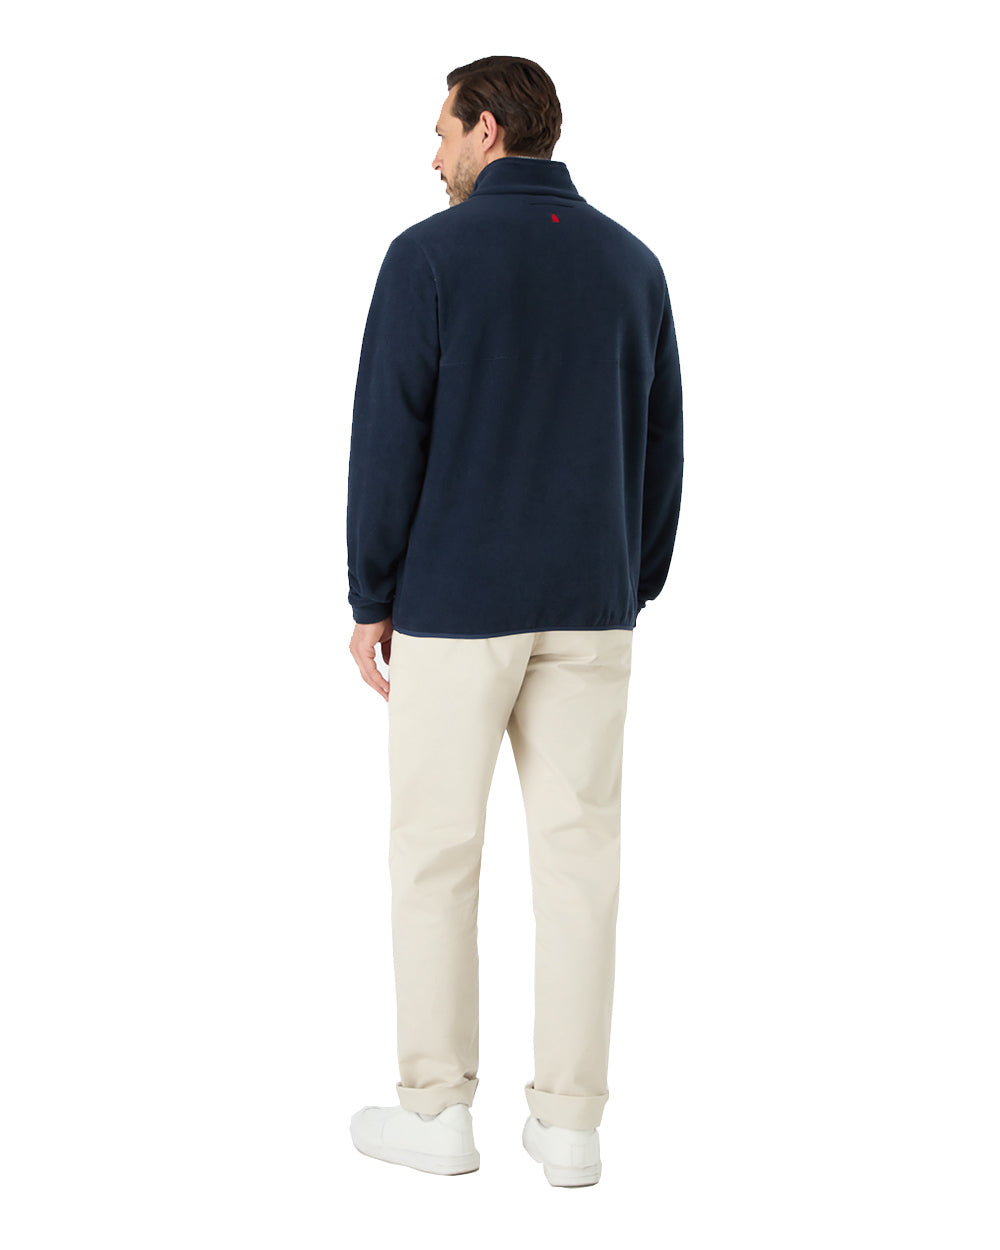 Navy Coloured Musto Mens Classic Fleece Pullover On A White Background 